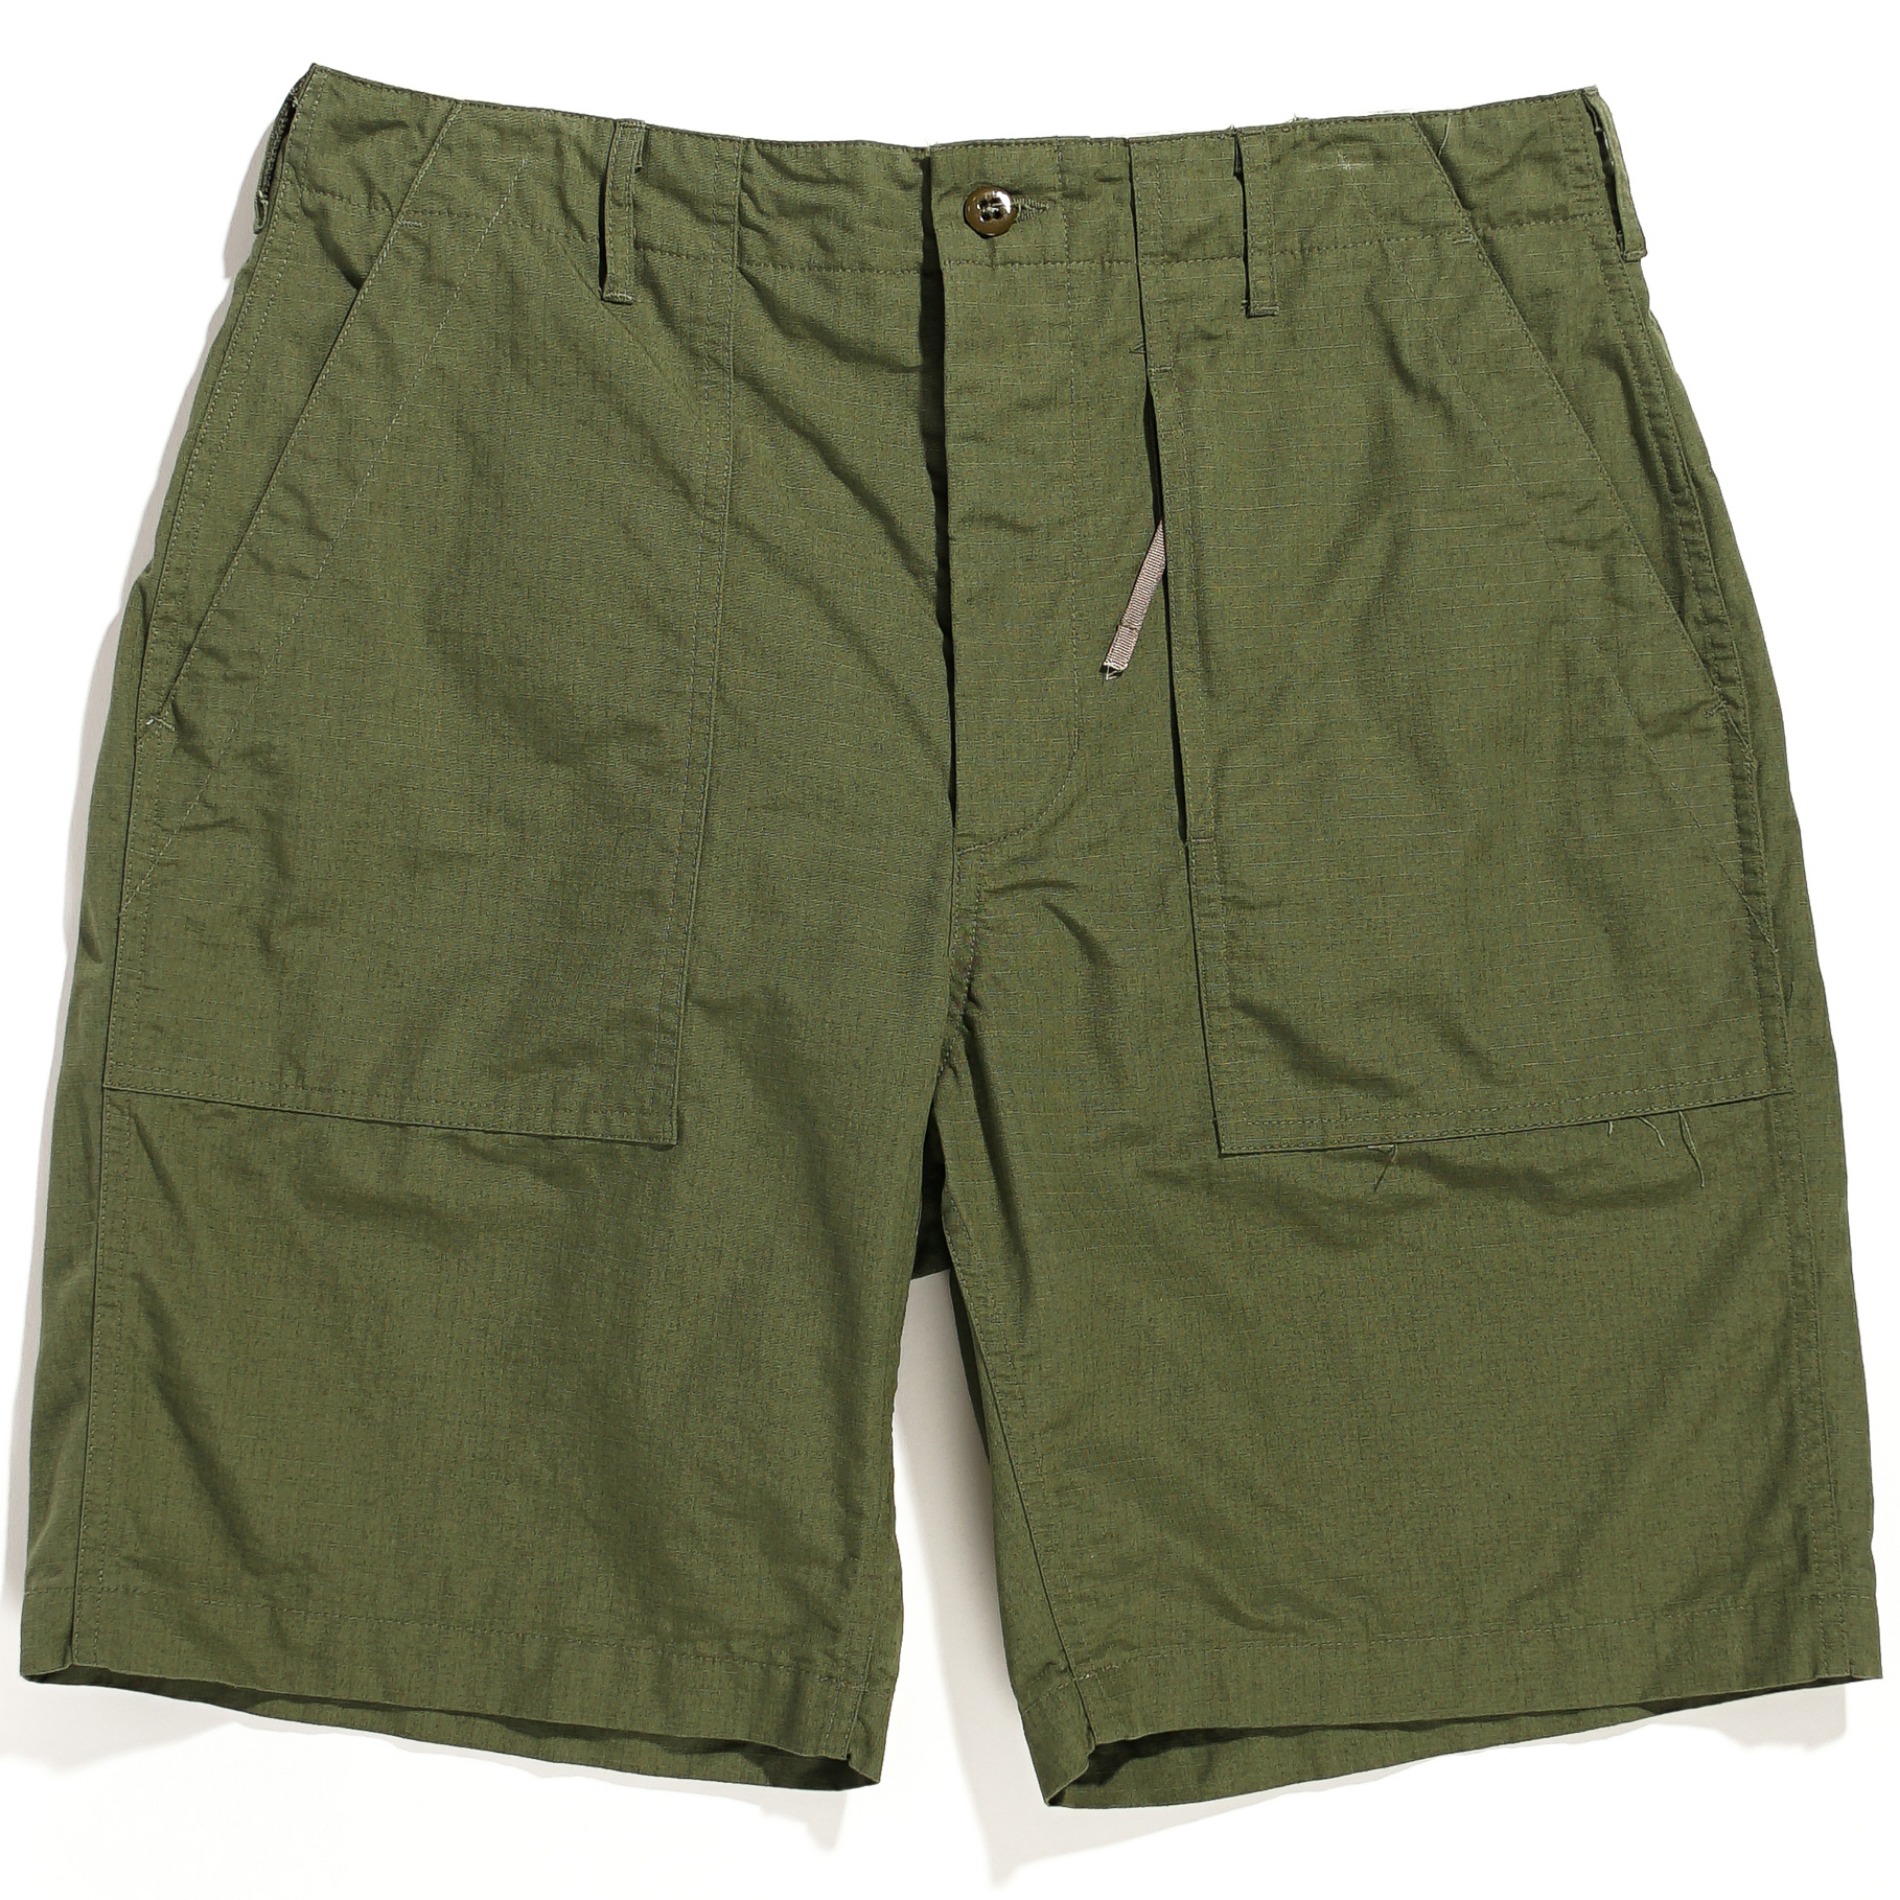 SS23 ENGINEERED GARMENTS FATIGUE SHORT OLIVE COTTON RIPSTOP